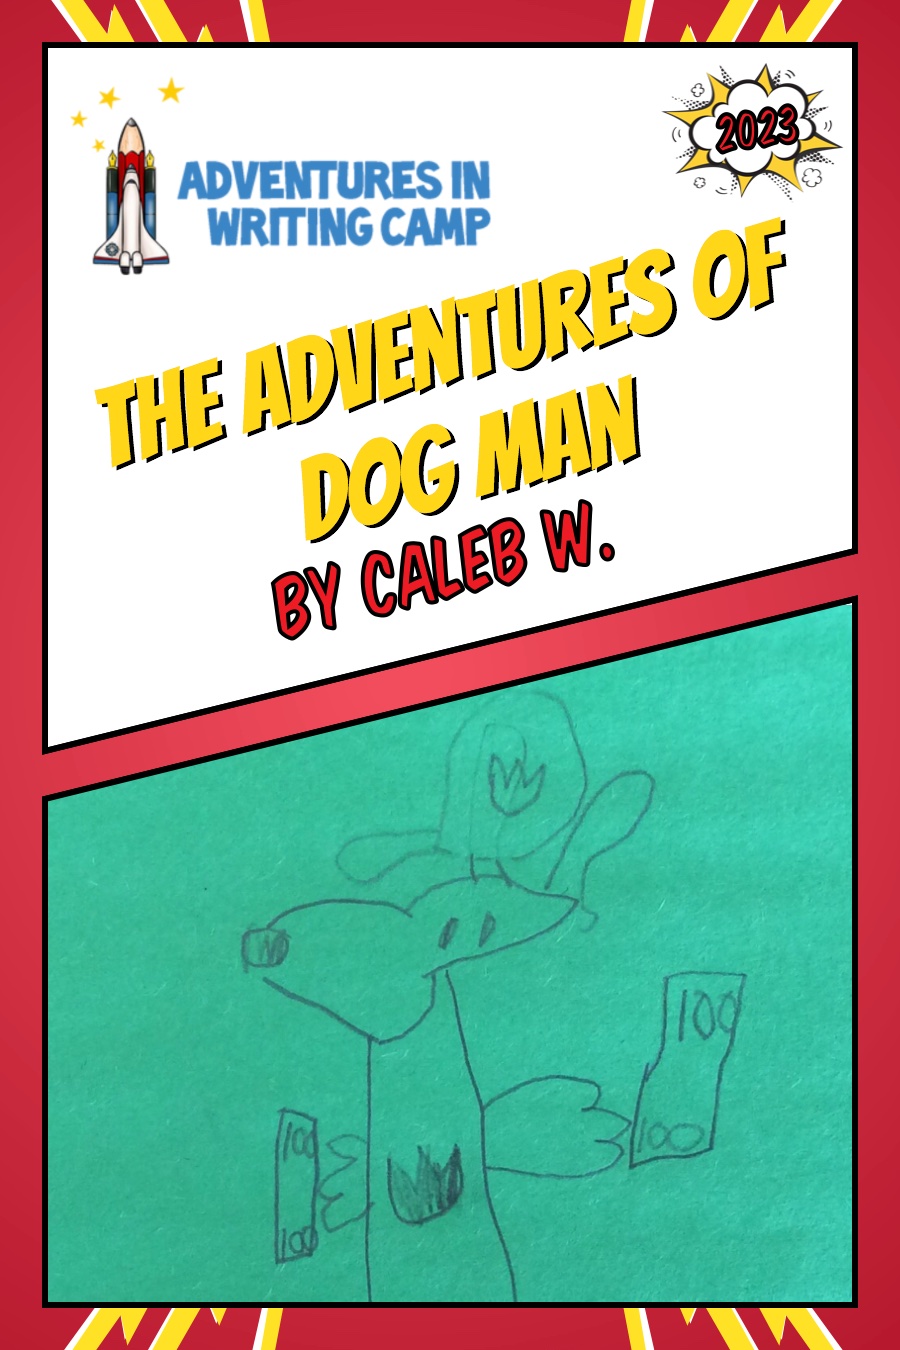 The Adventures of Dog Man by Caleb W